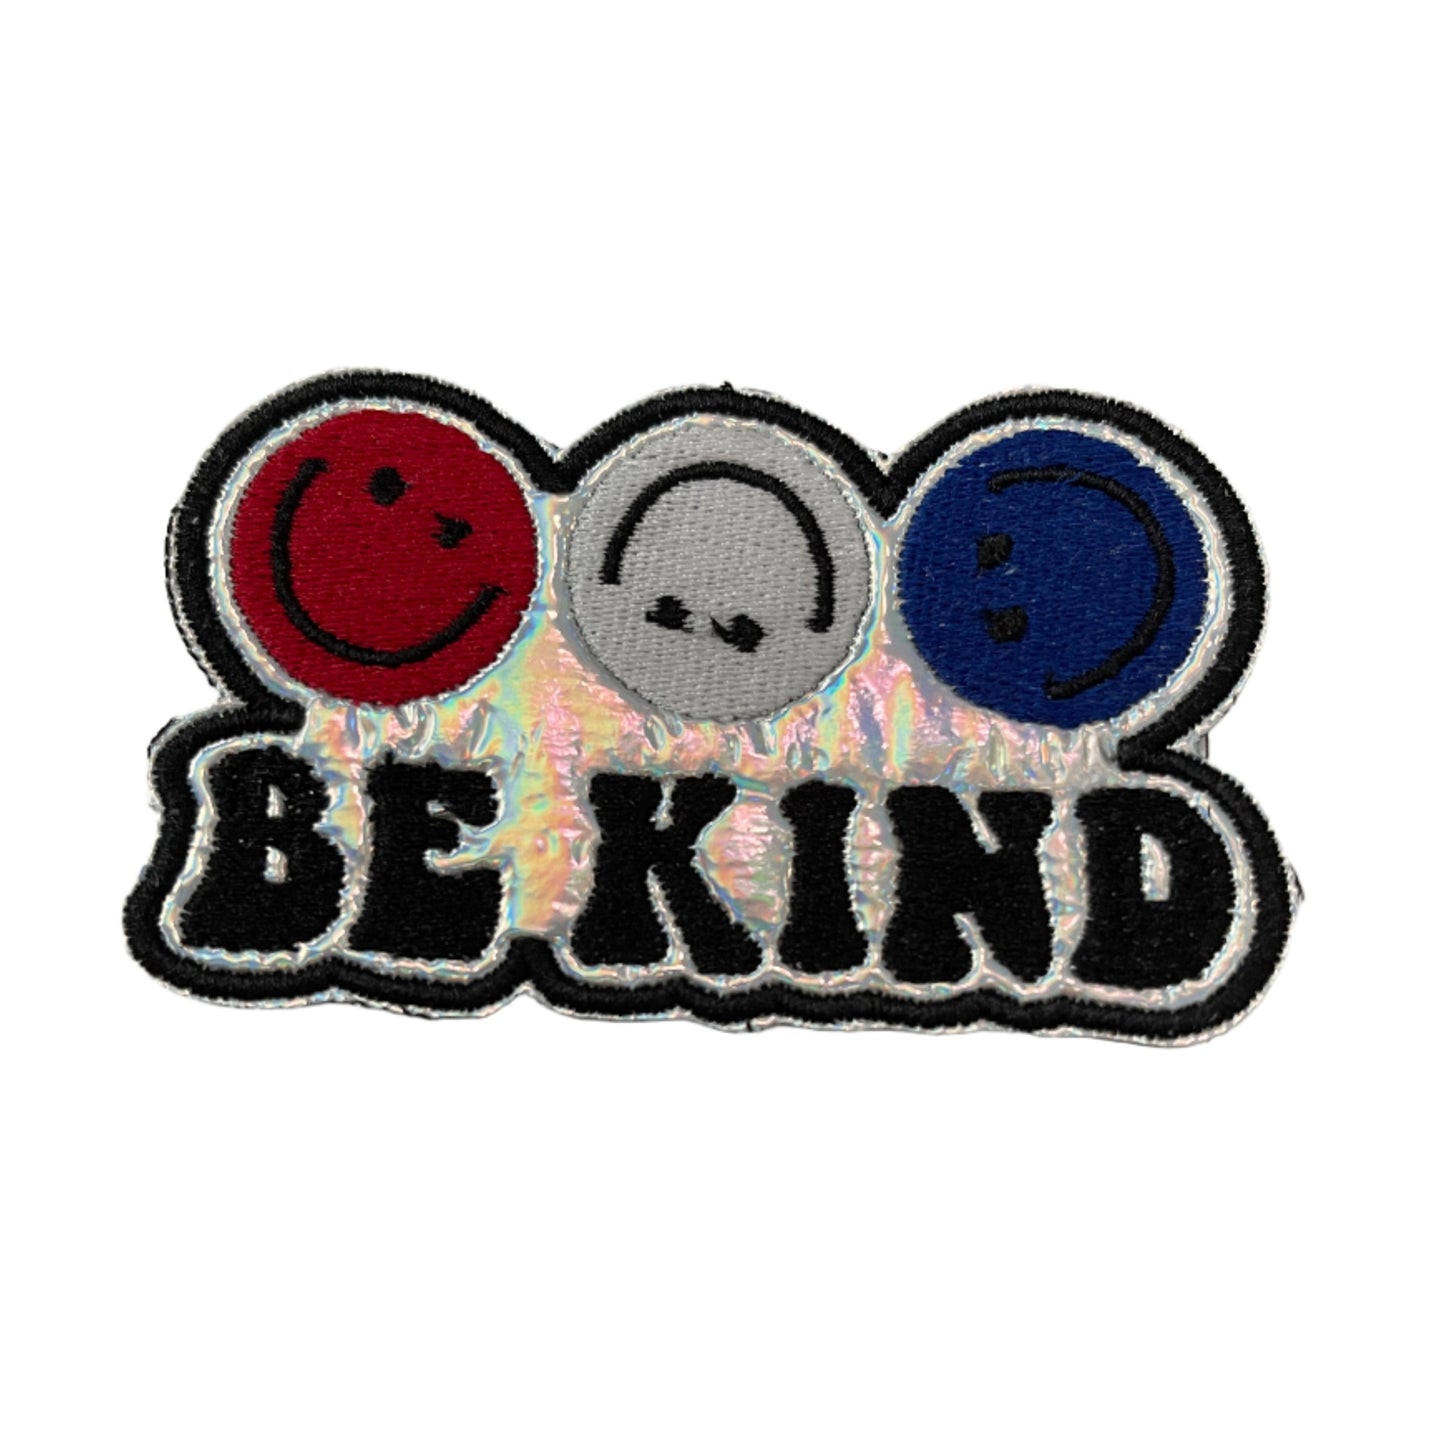 Handmade Be Kind Iron-On Patch | Red, White, Blue Smiley Faces on Holographic Silver